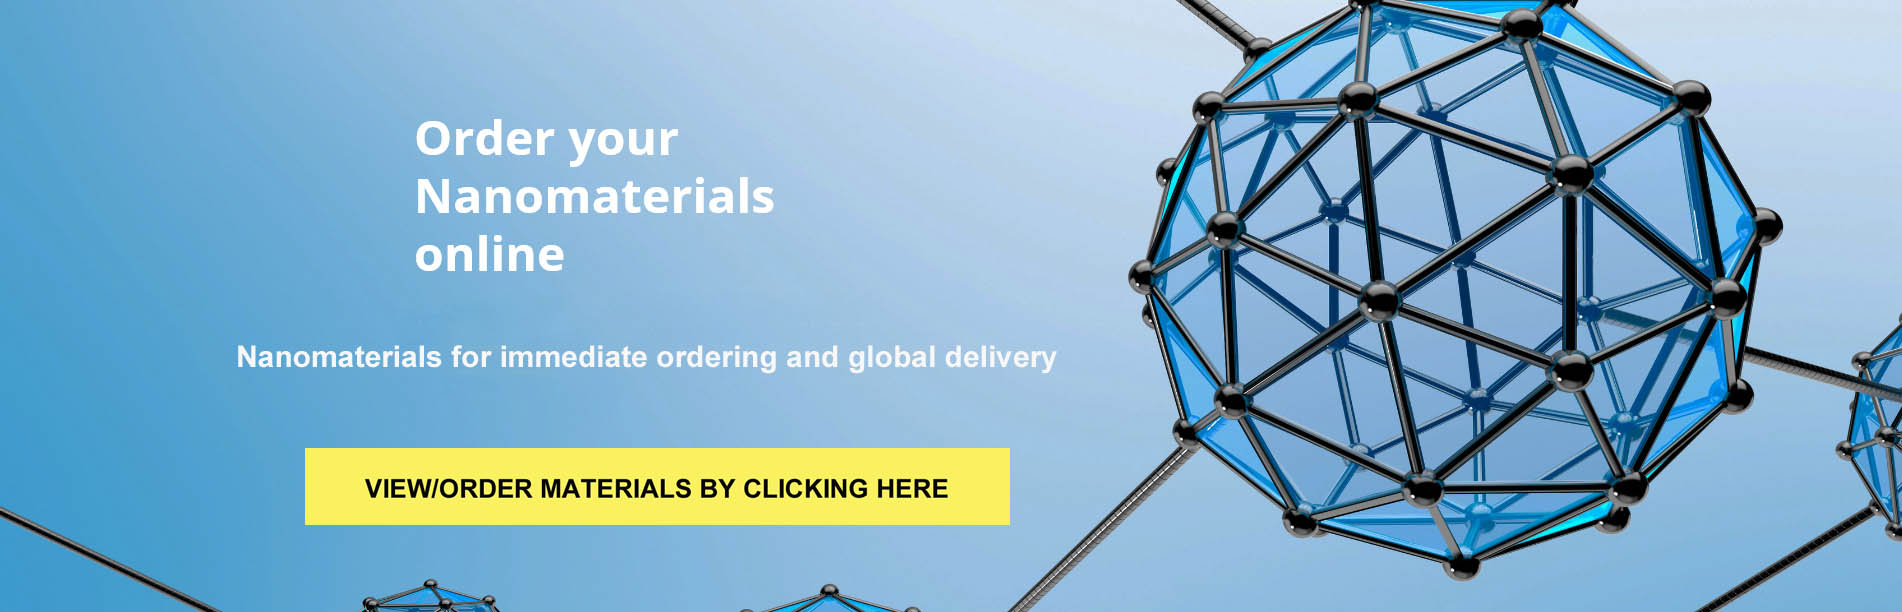 Nanomaterials and nano materials for online ordering and delivery